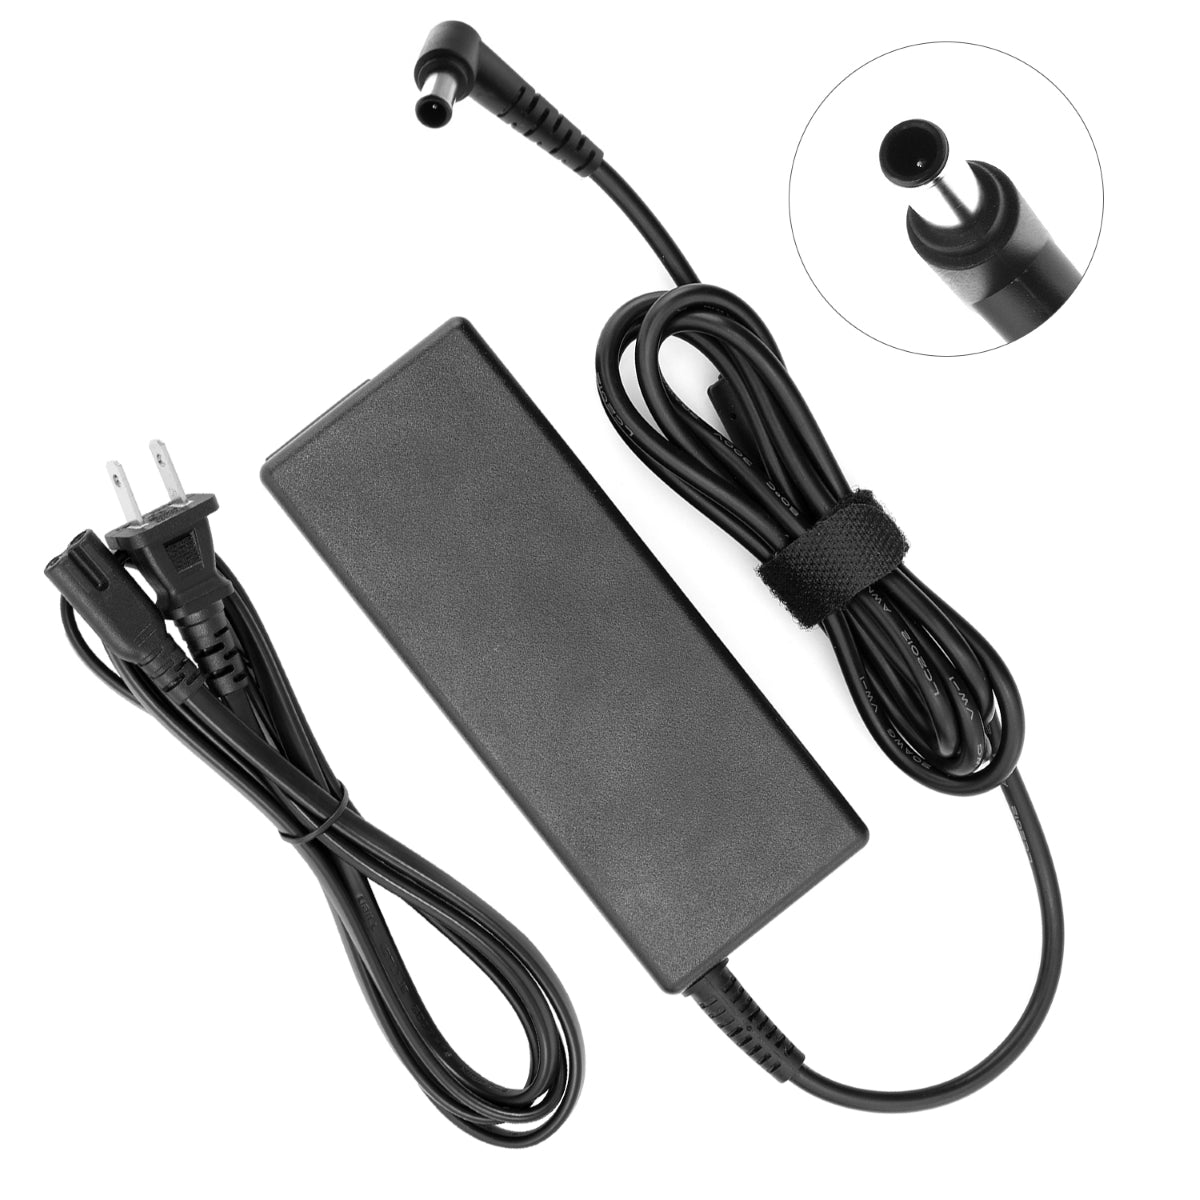 Power Adapter for LG 29WK600-W Monitor TV